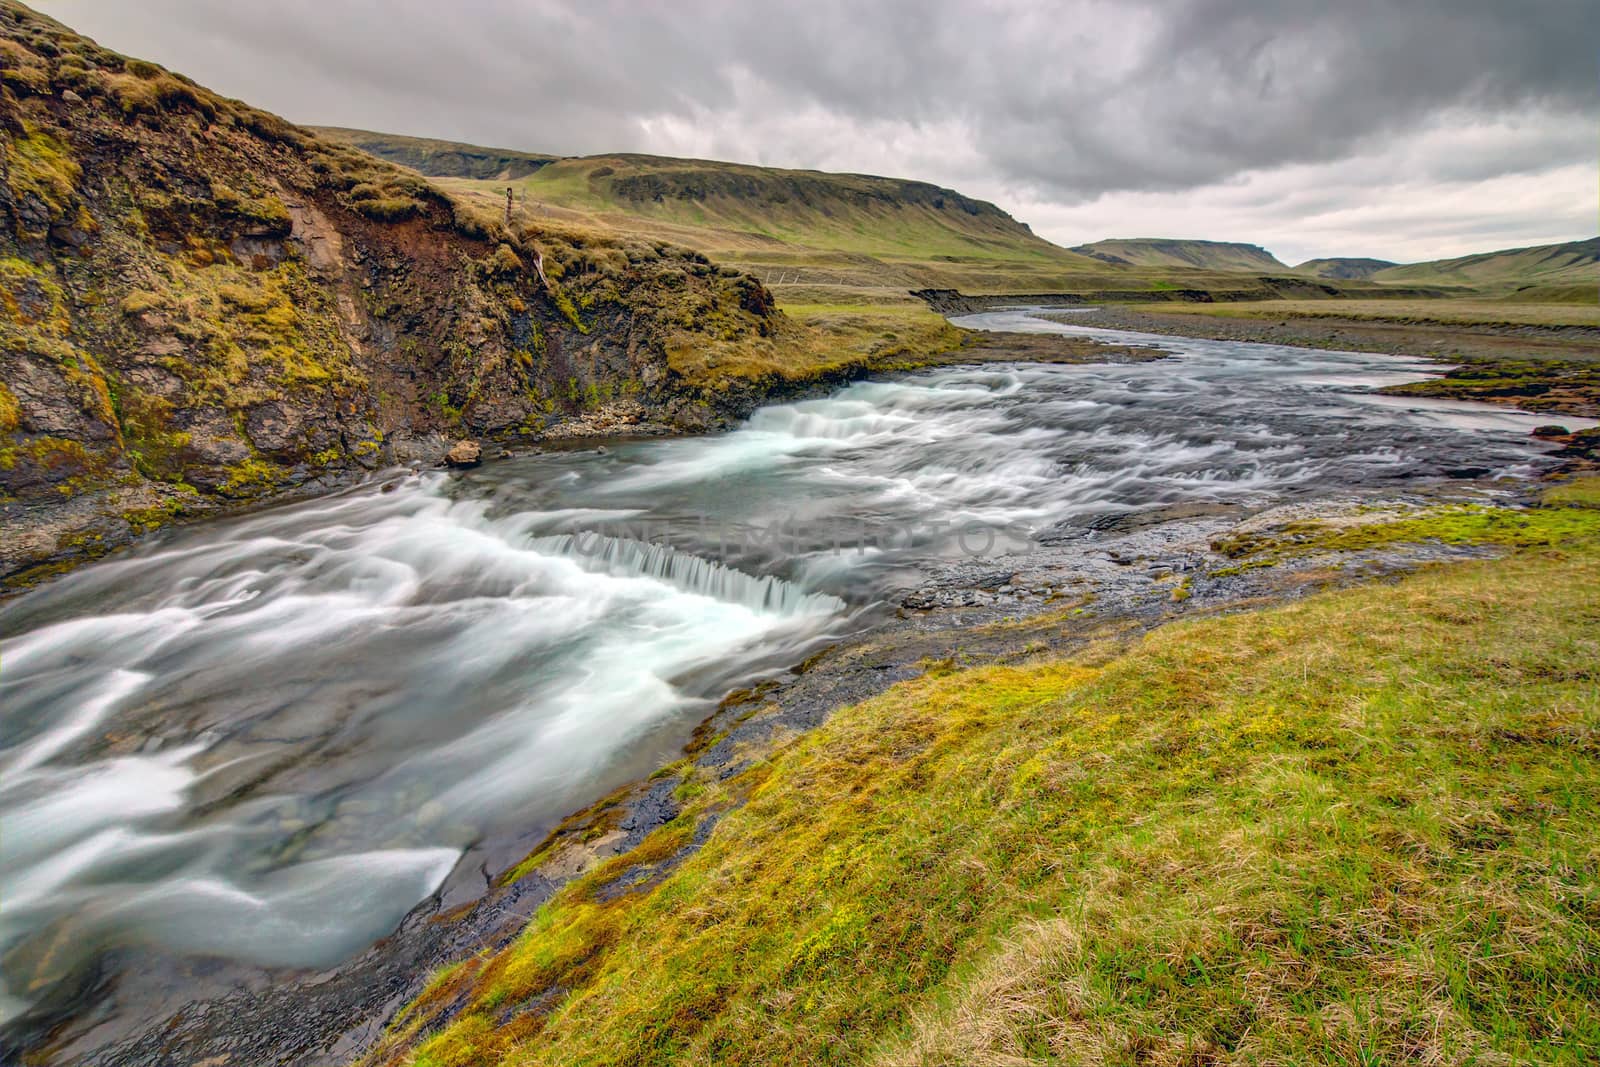 The wild Fjadra river in Iceland before the Fjardargljufur canyon